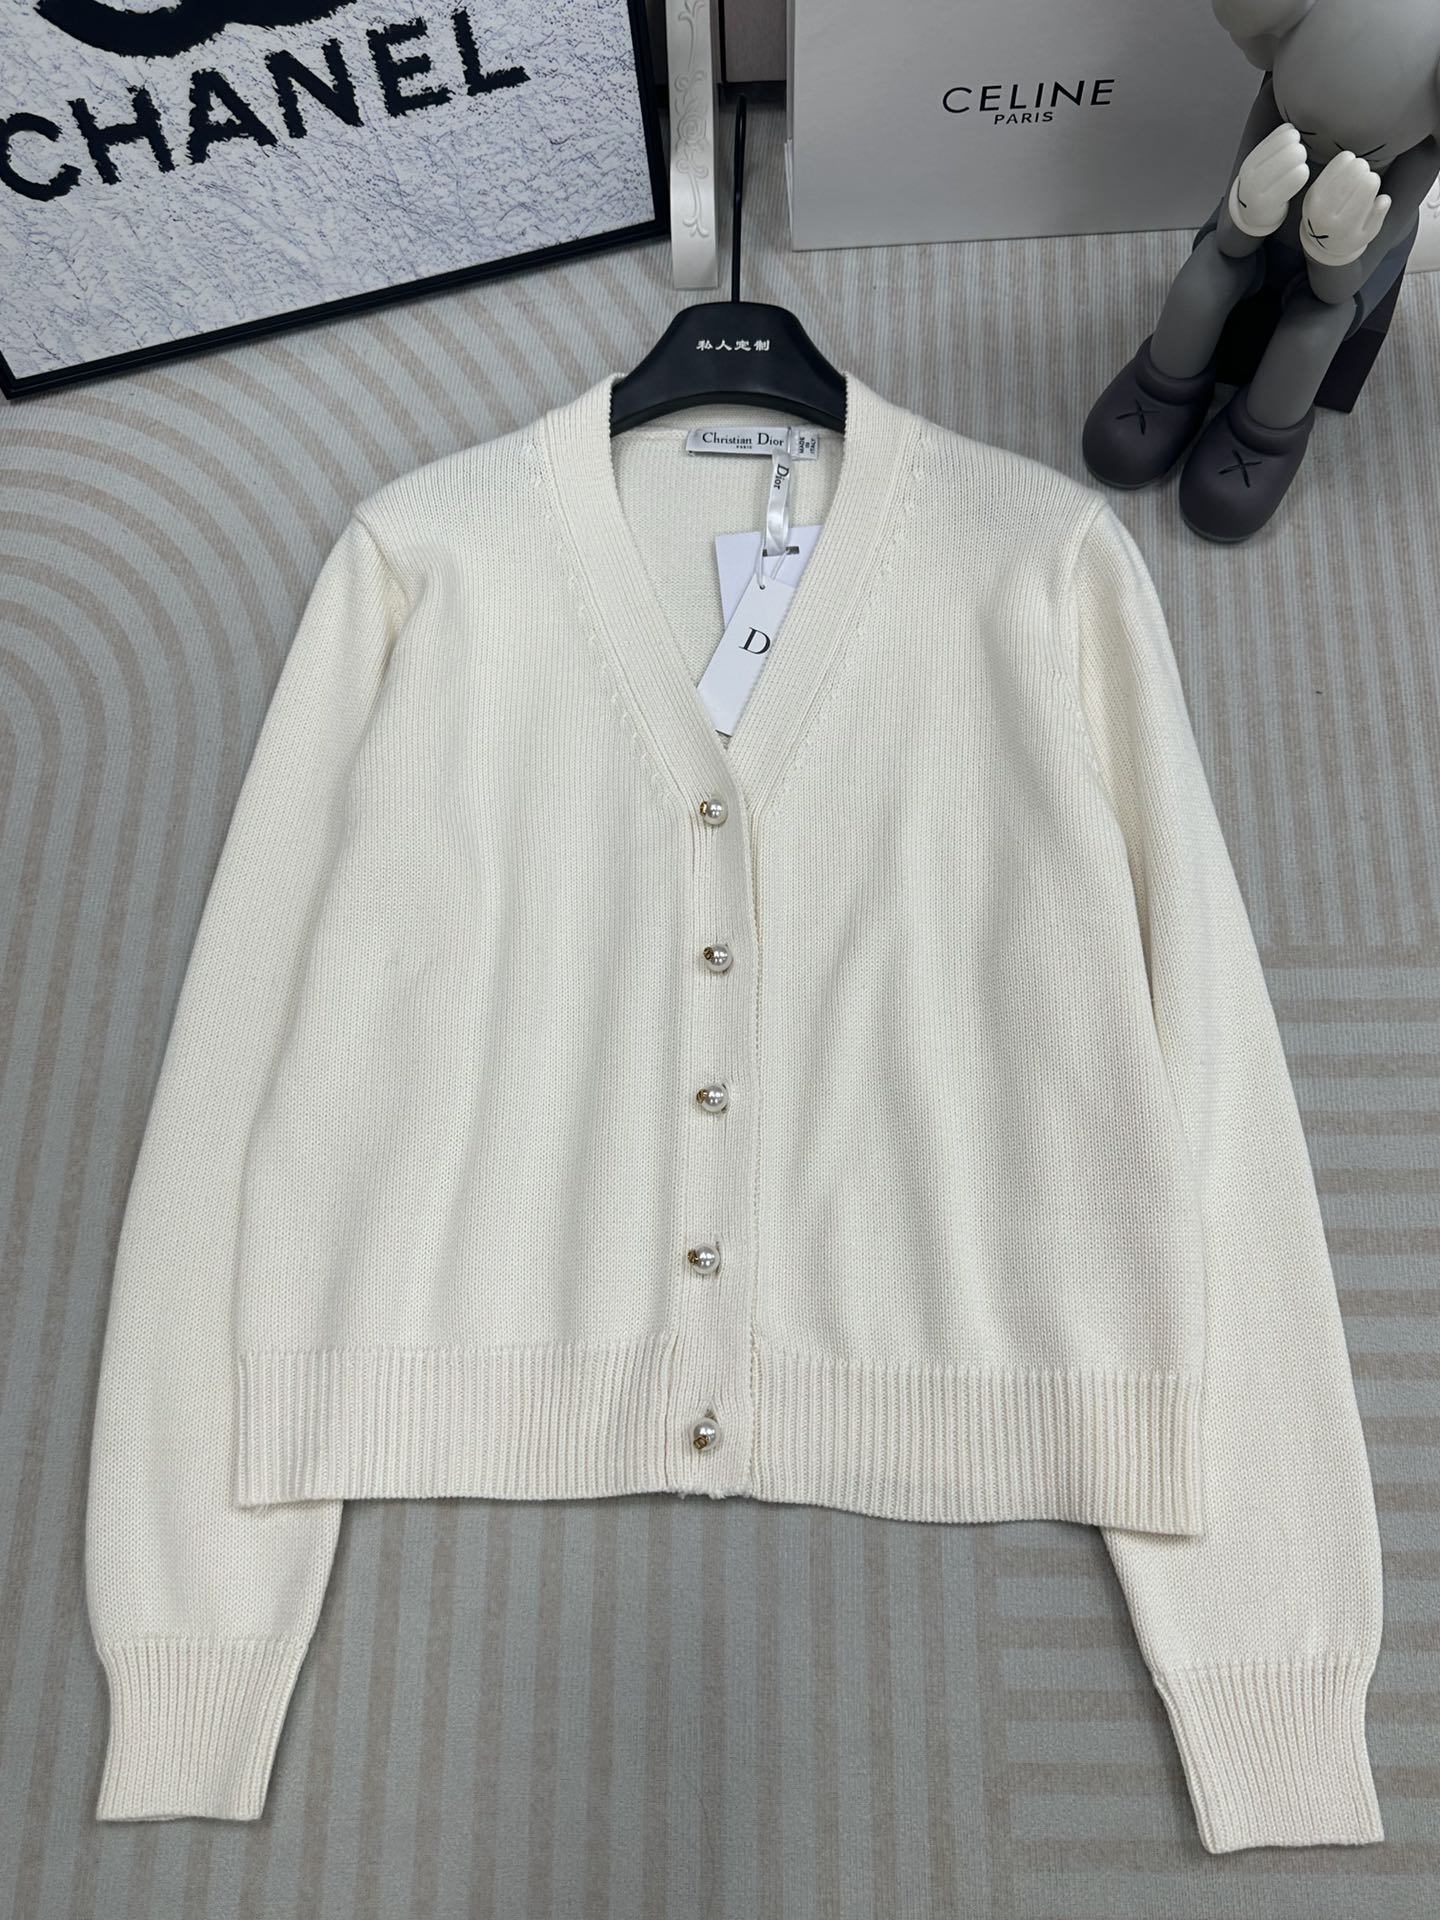 Dior Clothing Cardigans Knit Sweater Cashmere Knitting Spring Collection Fashion